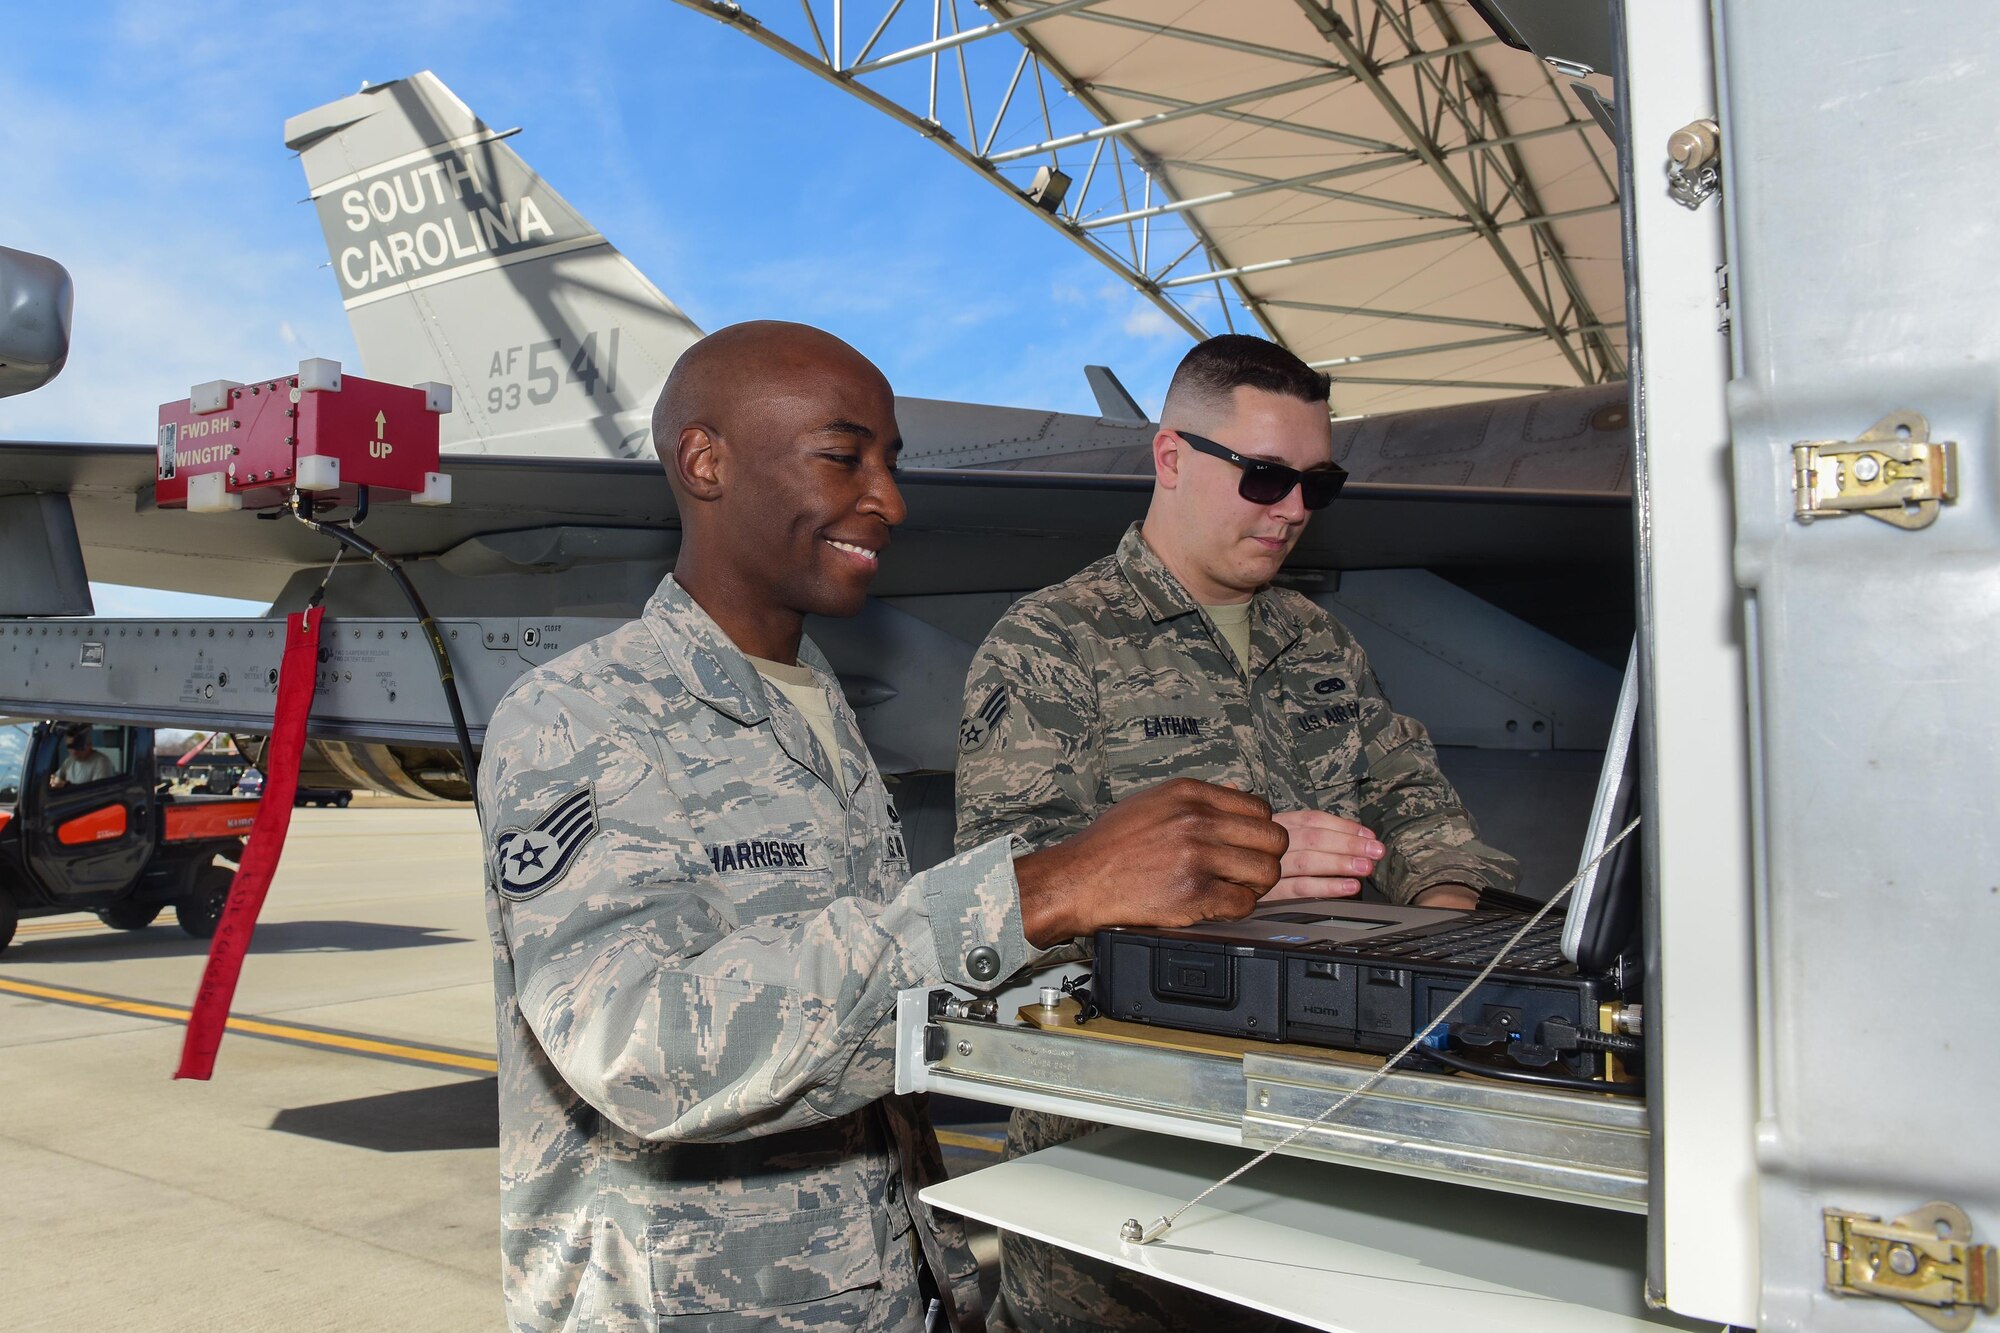 U.S. Air Force Staff Sgt. Timothy Harris-Bey, left, and Senior Airman Brock Latham, right, both inspectors from the 16th Electronic Warfare Squadron at Eglin Air Force Base, Fla., run tests on  one of the South Carolina Air National Guard’s F-16 Fighting Falcons at McEntire Joint National Guard Base, Jan. 18, 2017. The electronic warfare systems used on S.C. Air National Guard F-16 Fighting Falcons underwent the annual inspection; ensuring testing and maintenance requirements are properly conducted. (U.S. Air National Guard photo by Airman 1st Class Megan Floyd)